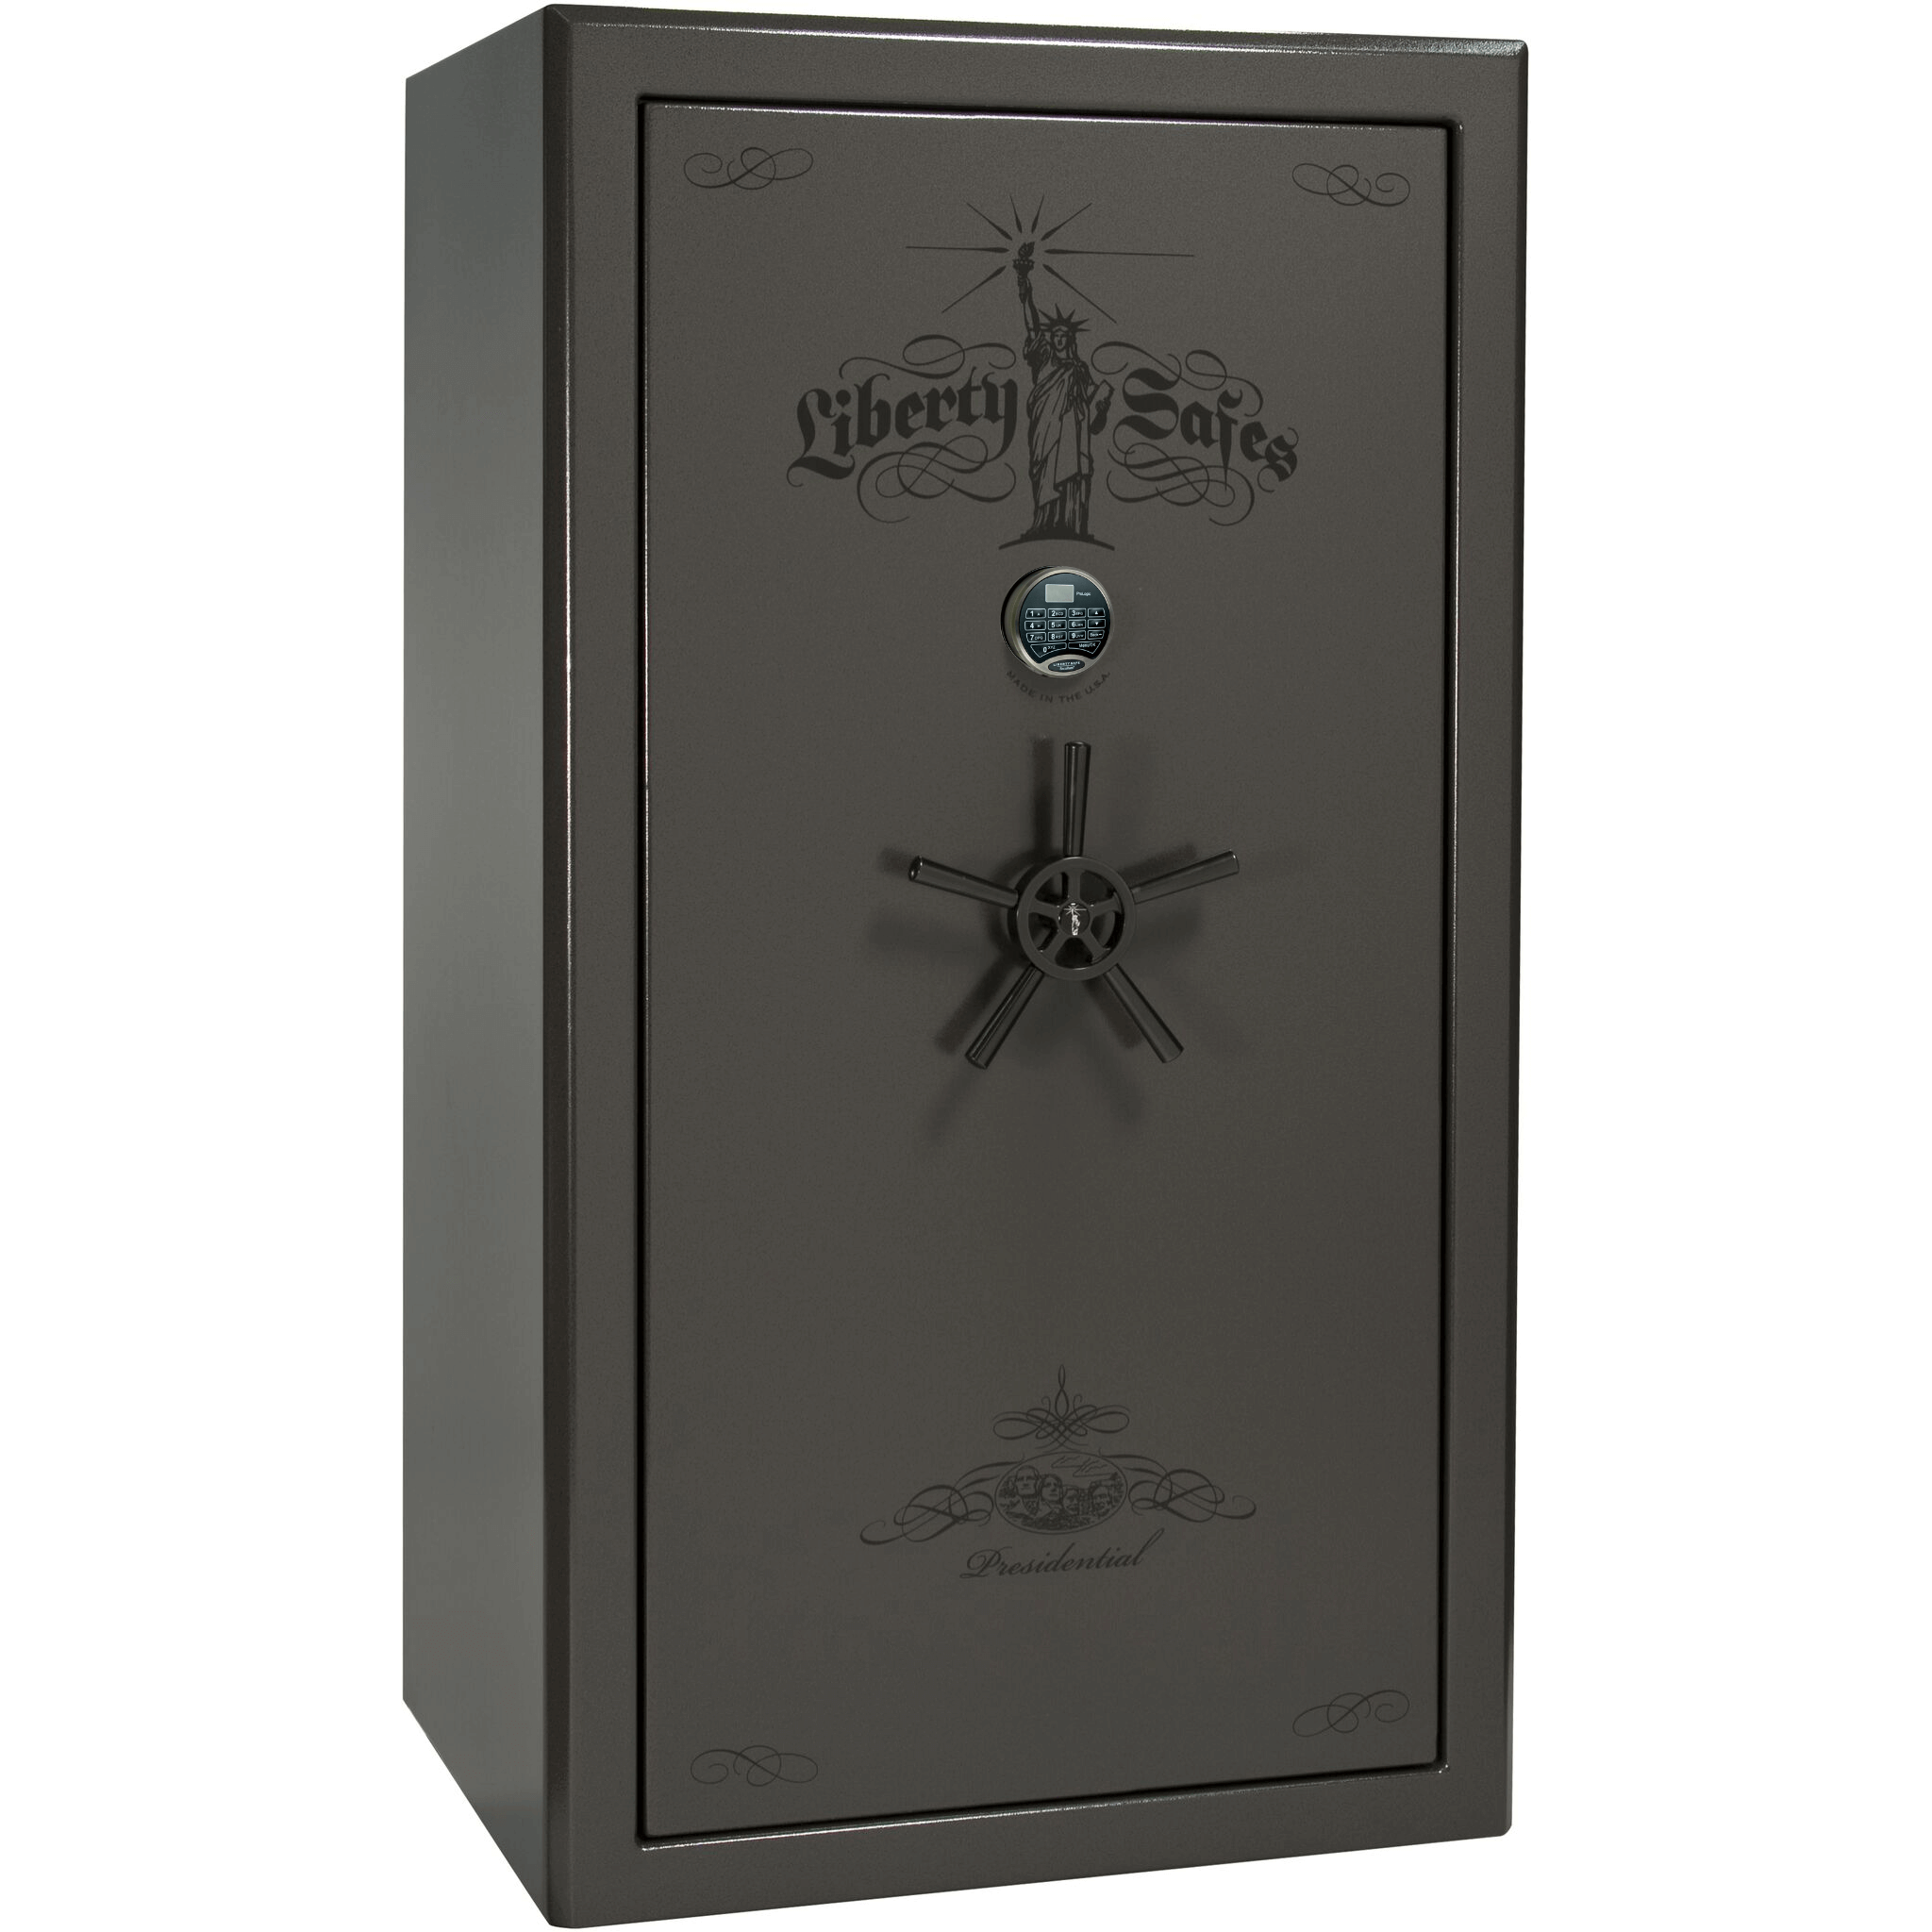 Presidential Series | Level 8 Security | 2.5 Hours Fire Protection | 50 | Dimensions: 72.5"(H) x 42"(W) x 32"(D) | Burgundy Marble | Mechanical Lock, photo 33